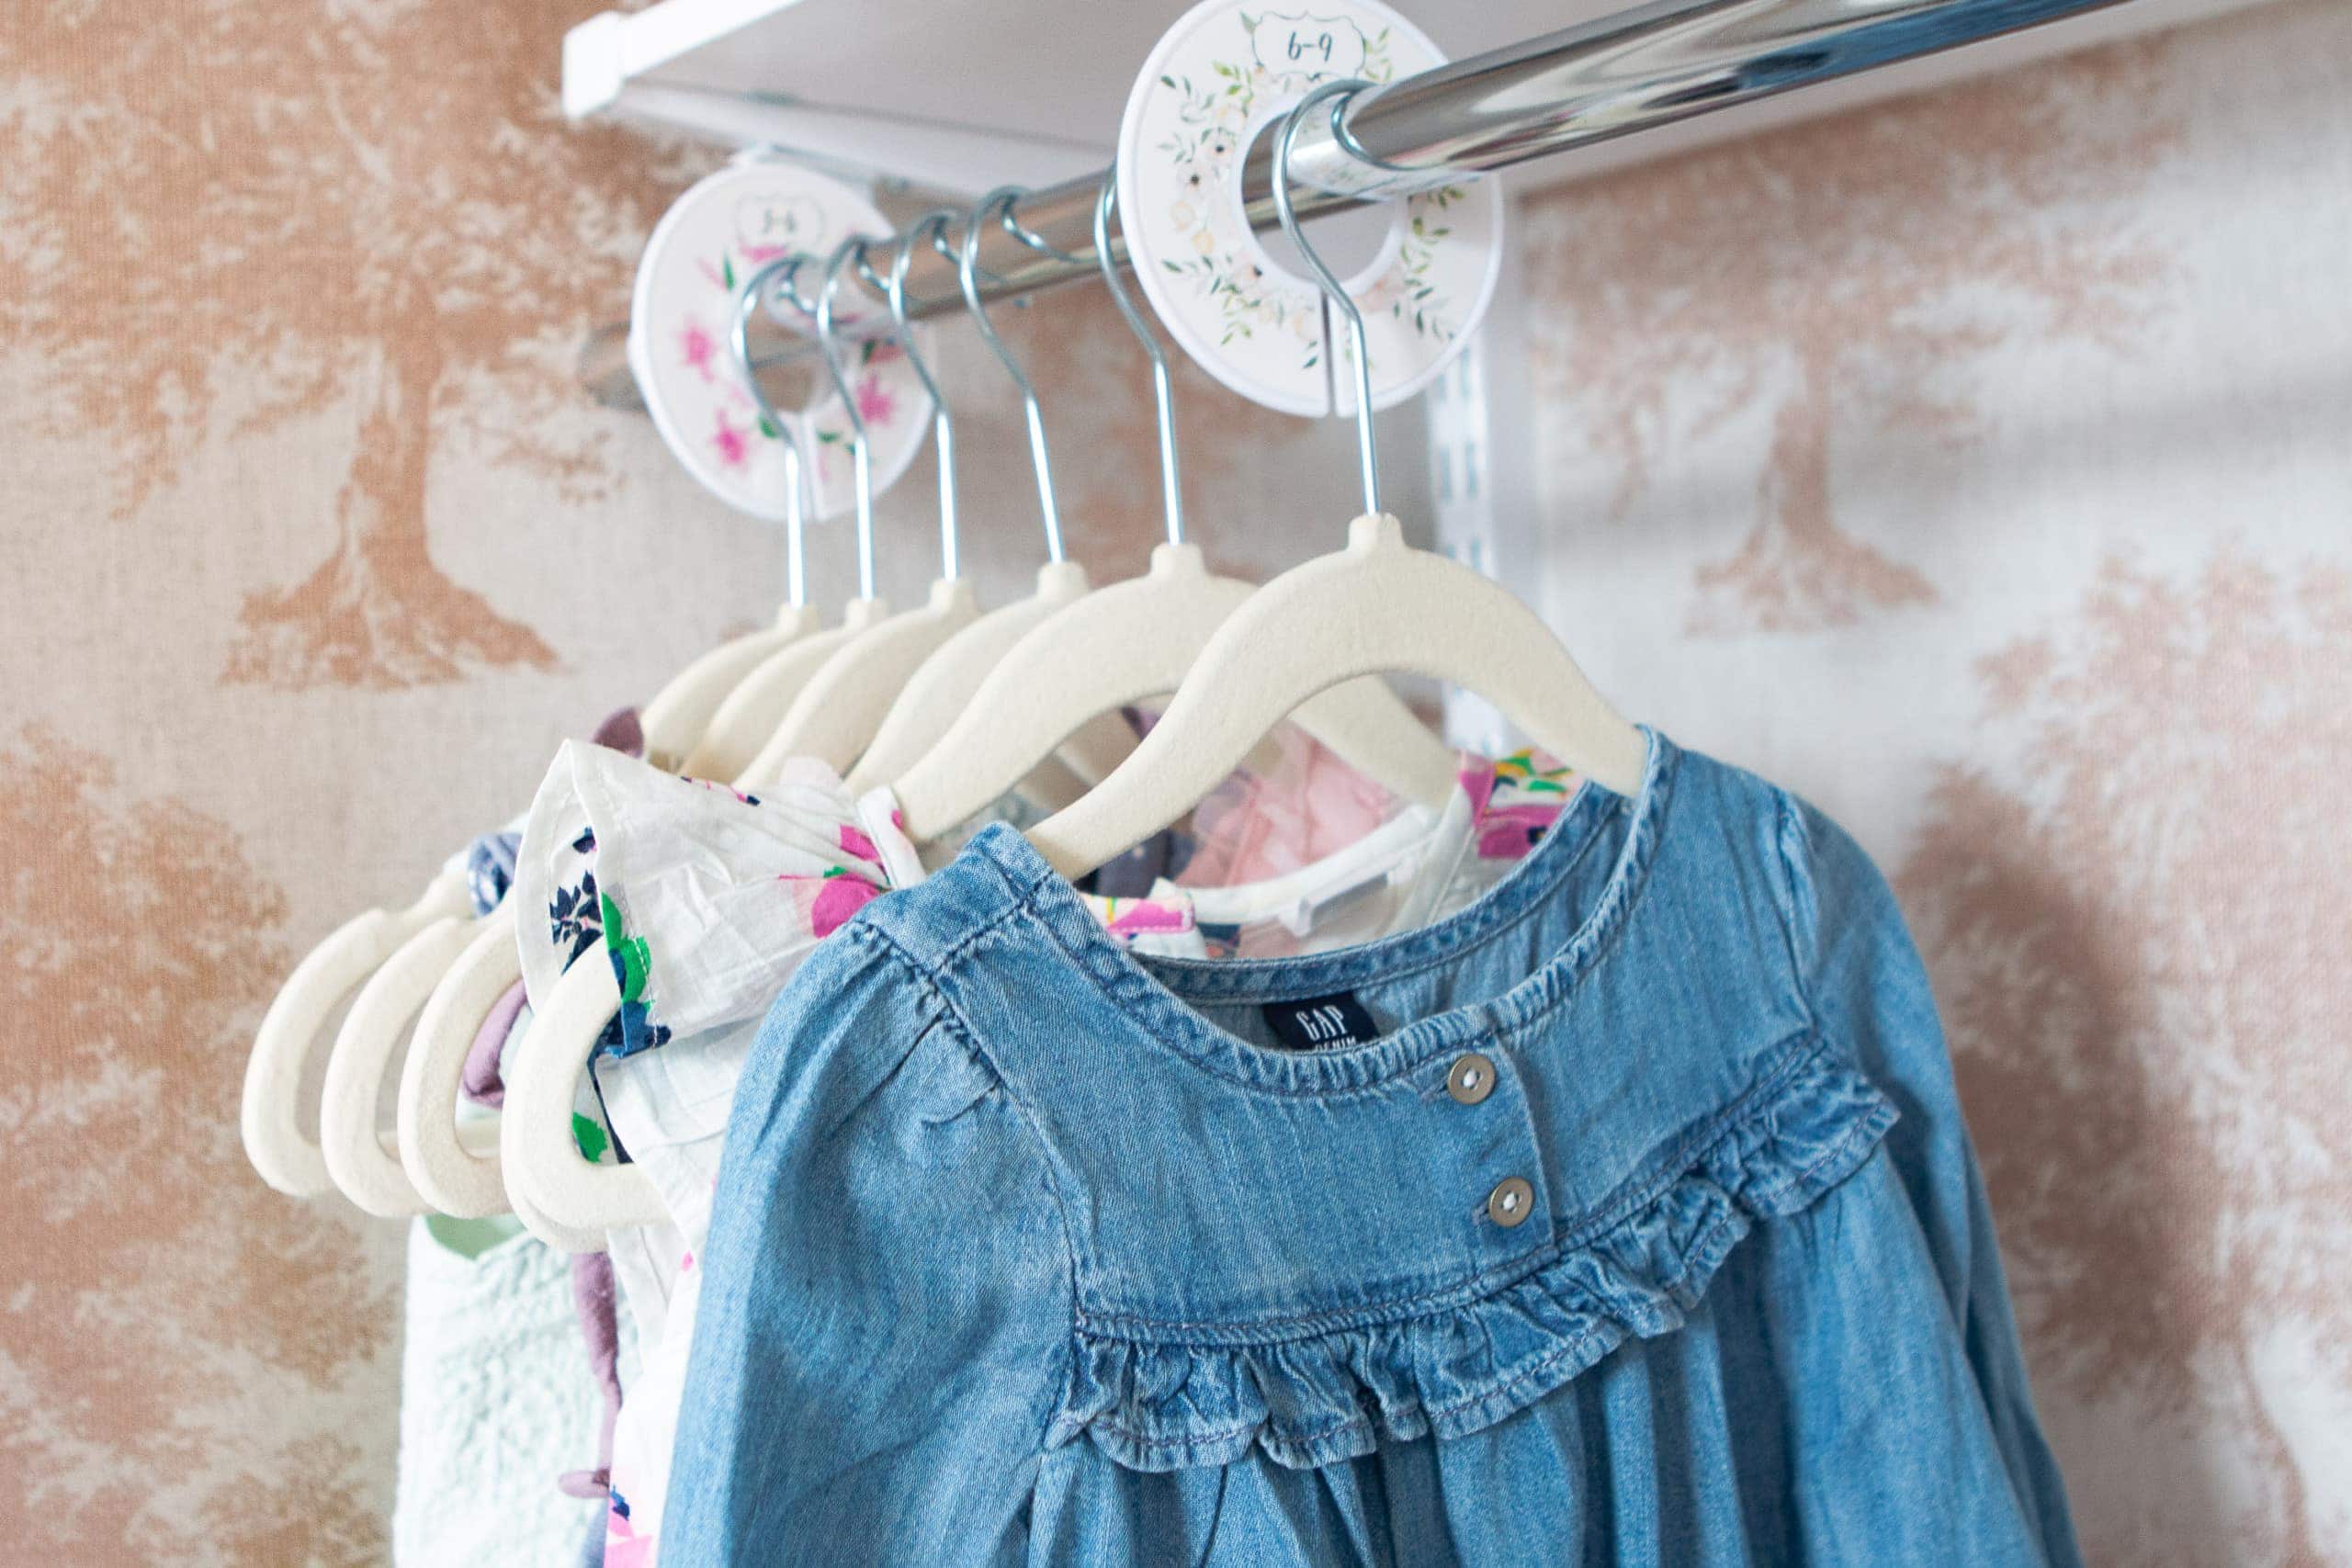 How to organize clothes in a nursery